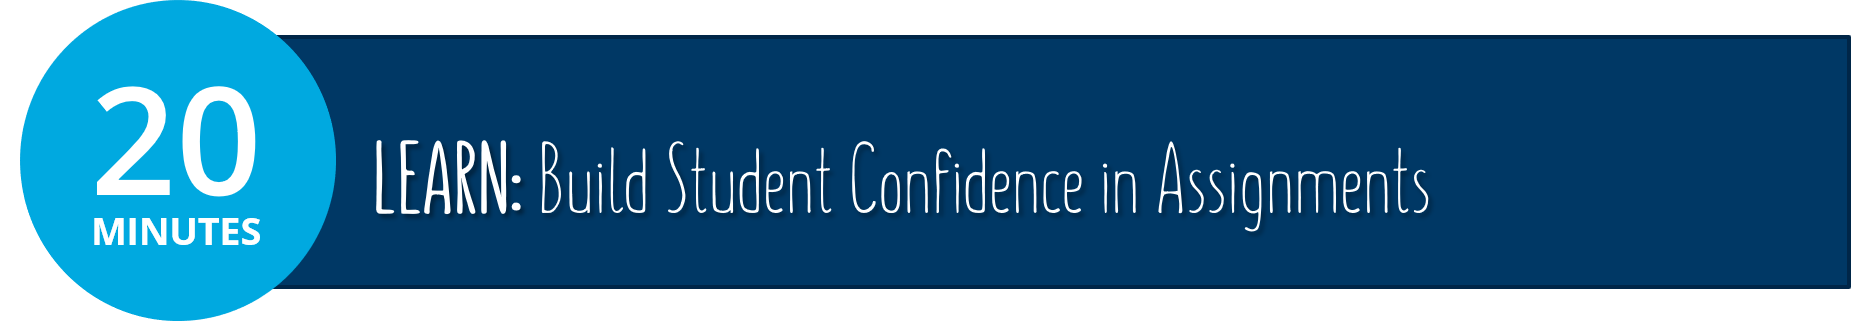 Learn how to build student confidence in assignments